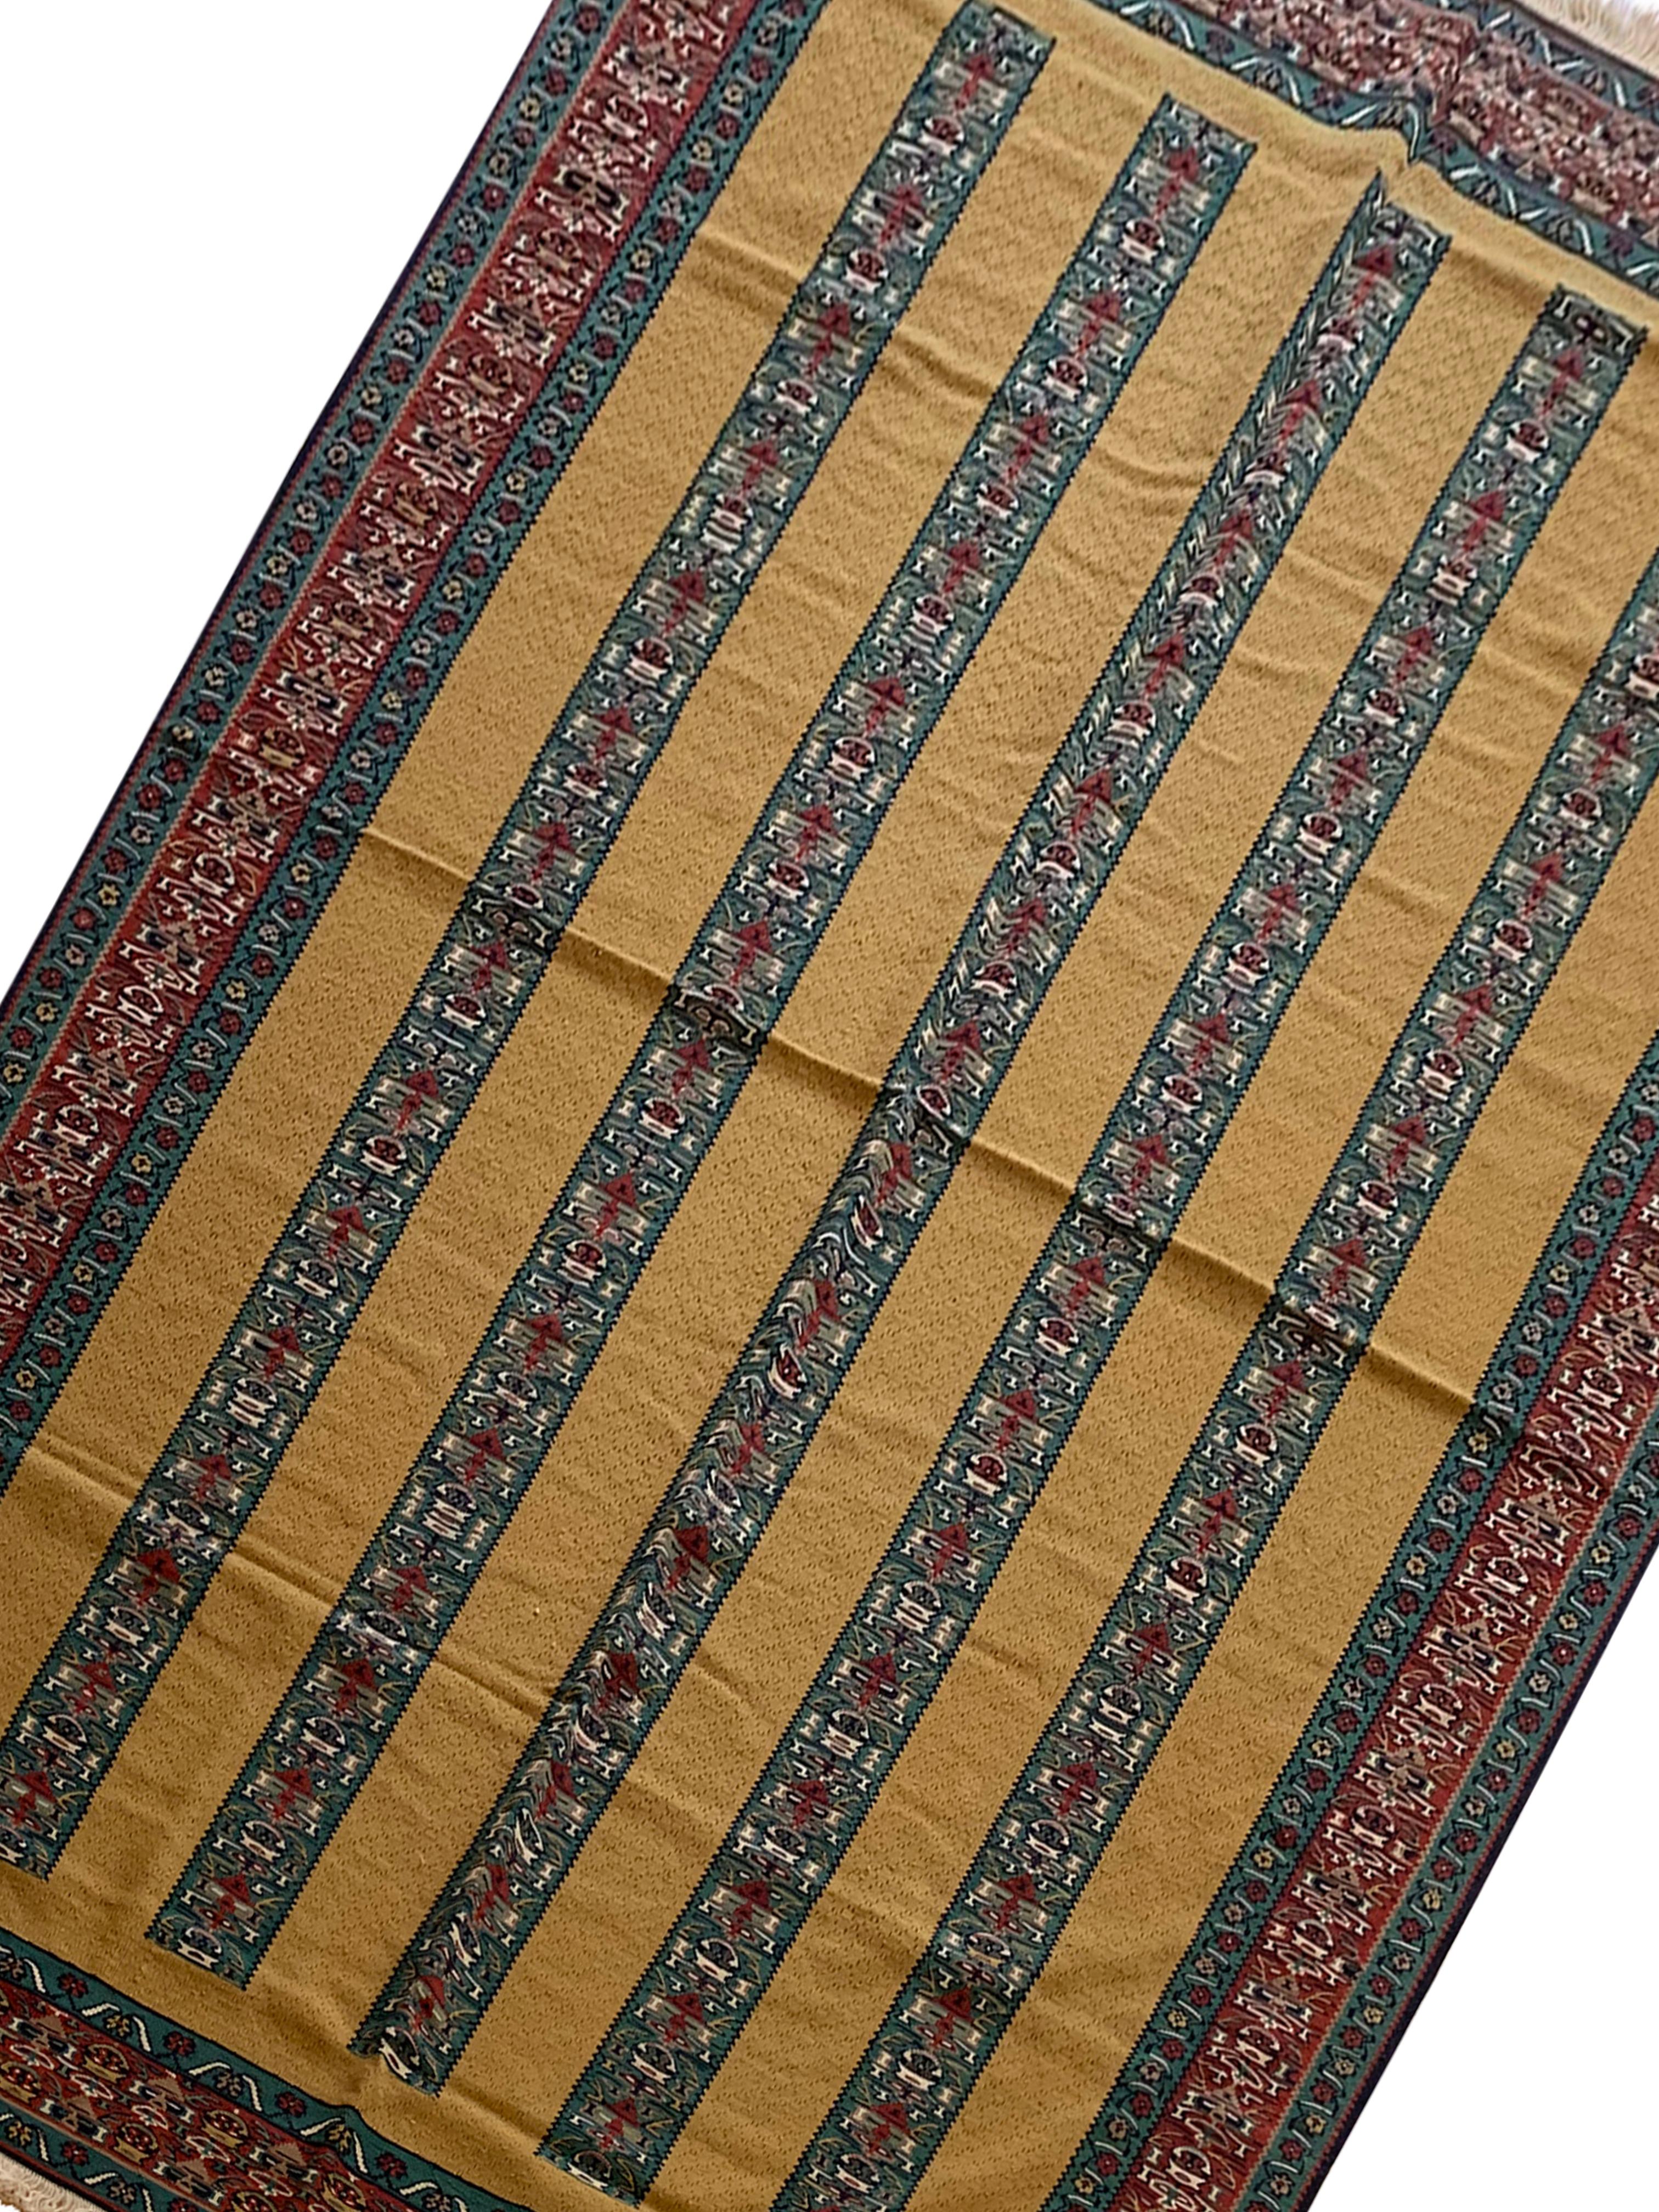 Vegetable Dyed Modern Striped Yellow Kilim Rug Handwoven Oriental Wool Carpet For Sale